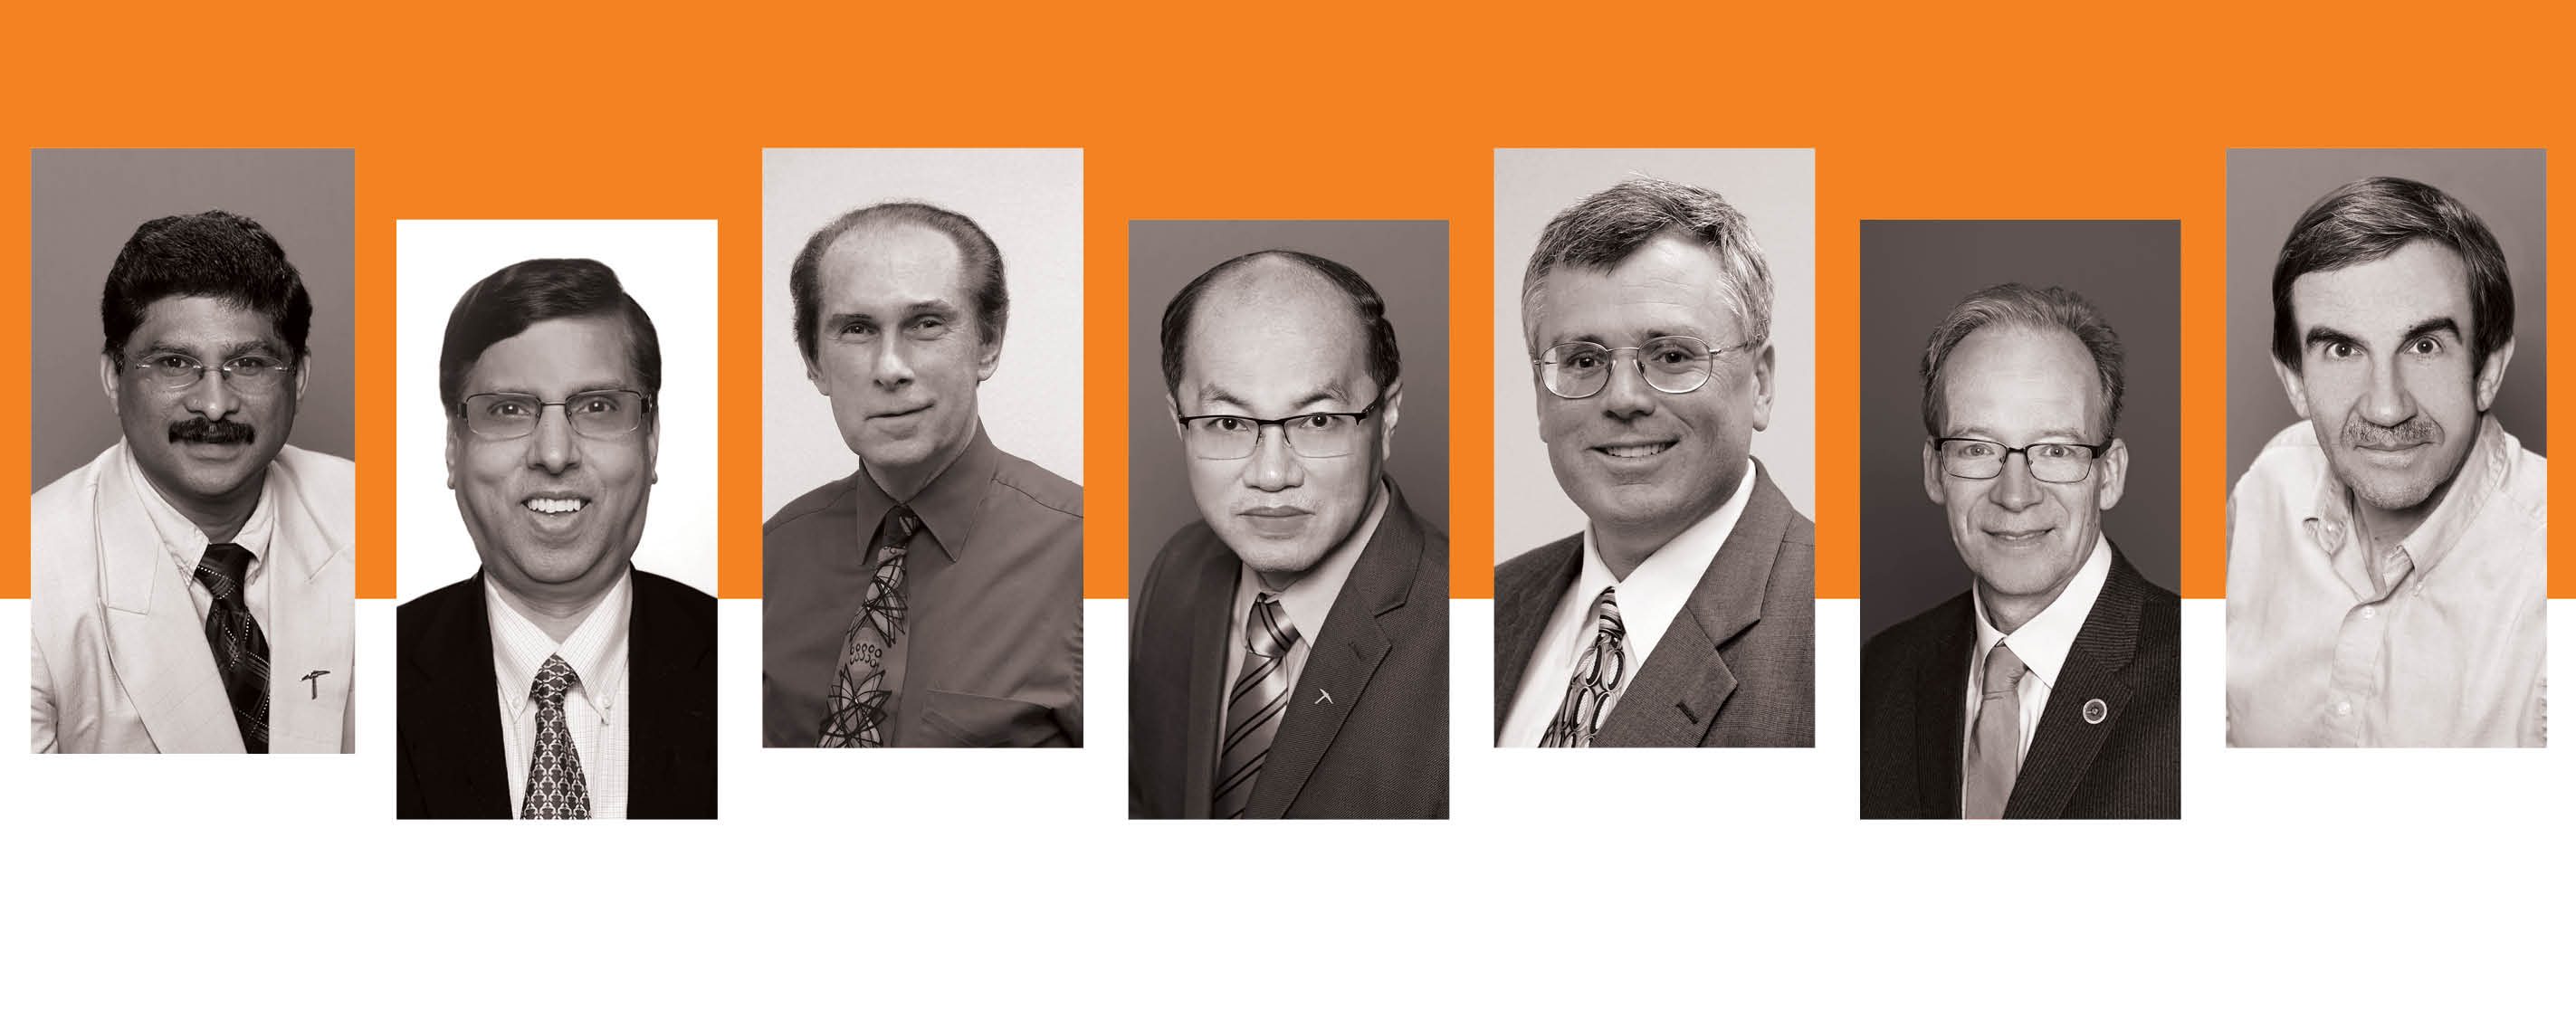 UTEP Faculty Members Named to List of World’s Top Researchers 